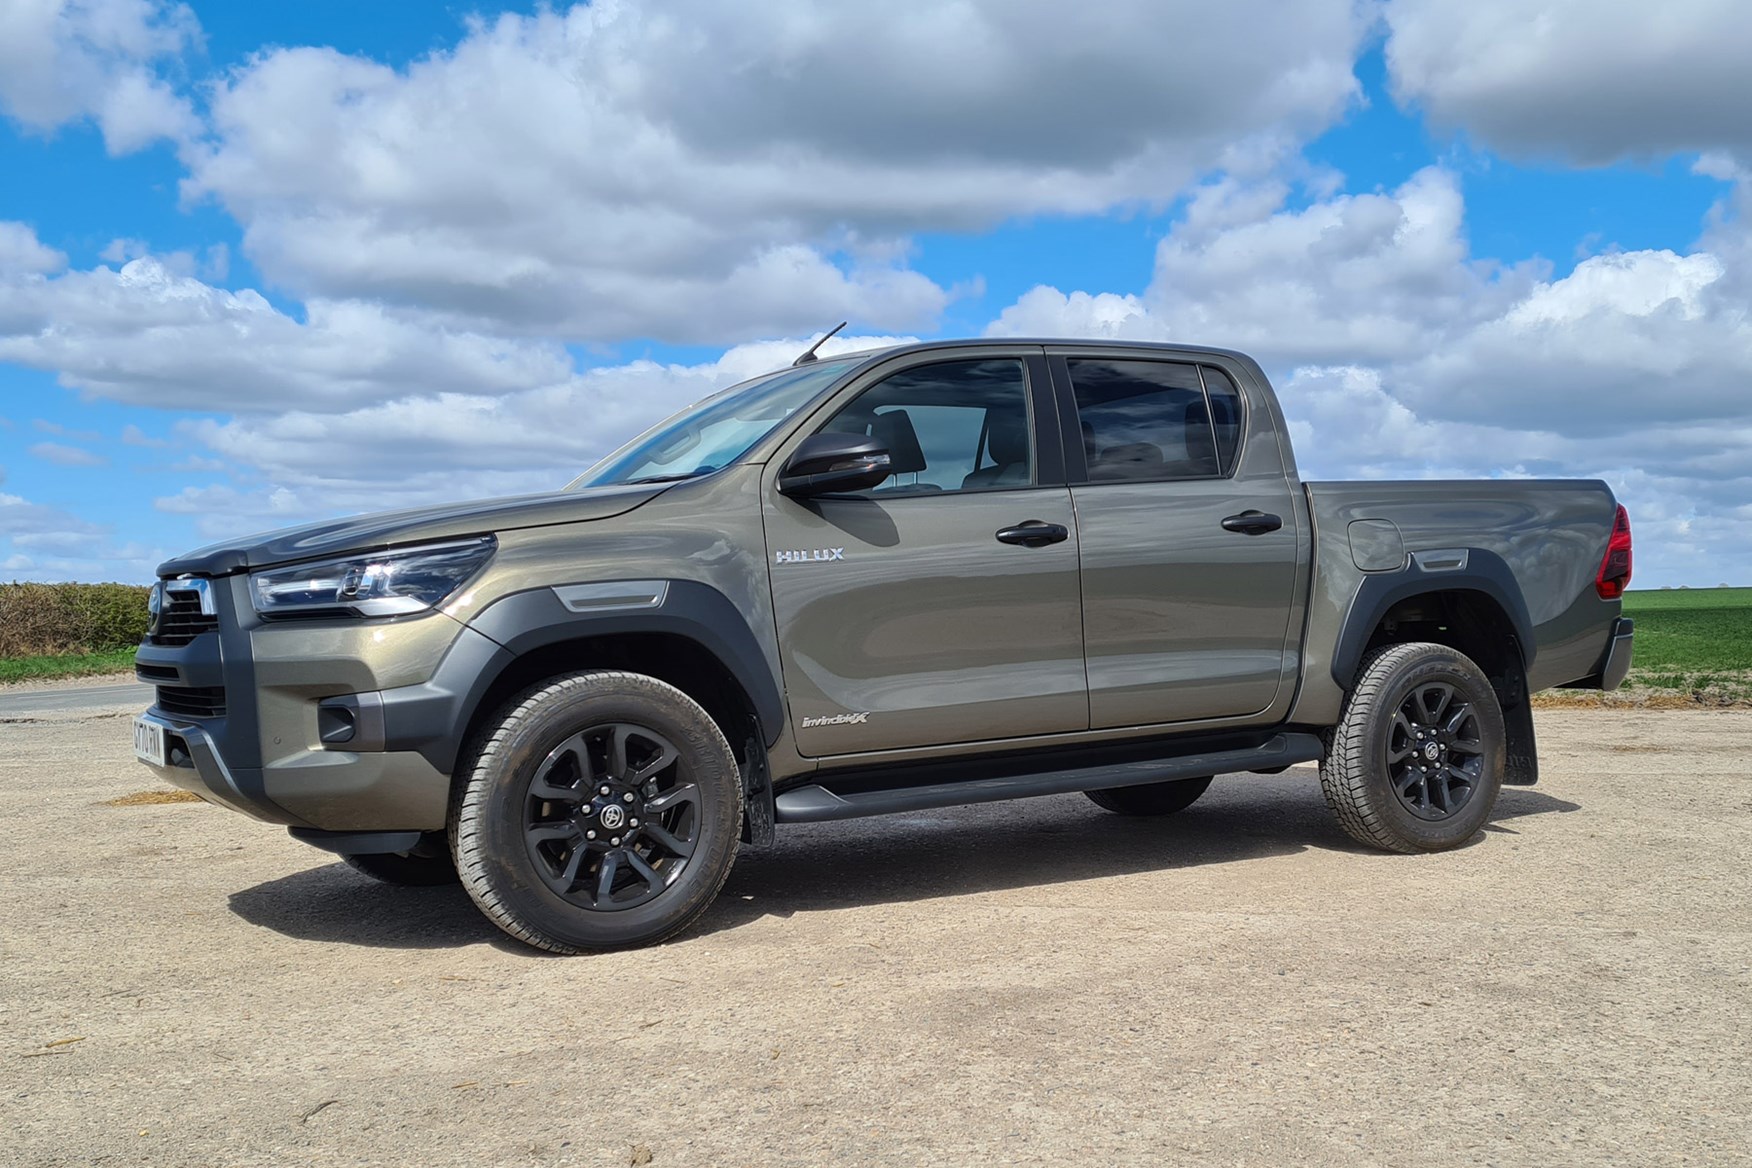 Toyota Hilux Invincible X 2.8D manual review - front, green